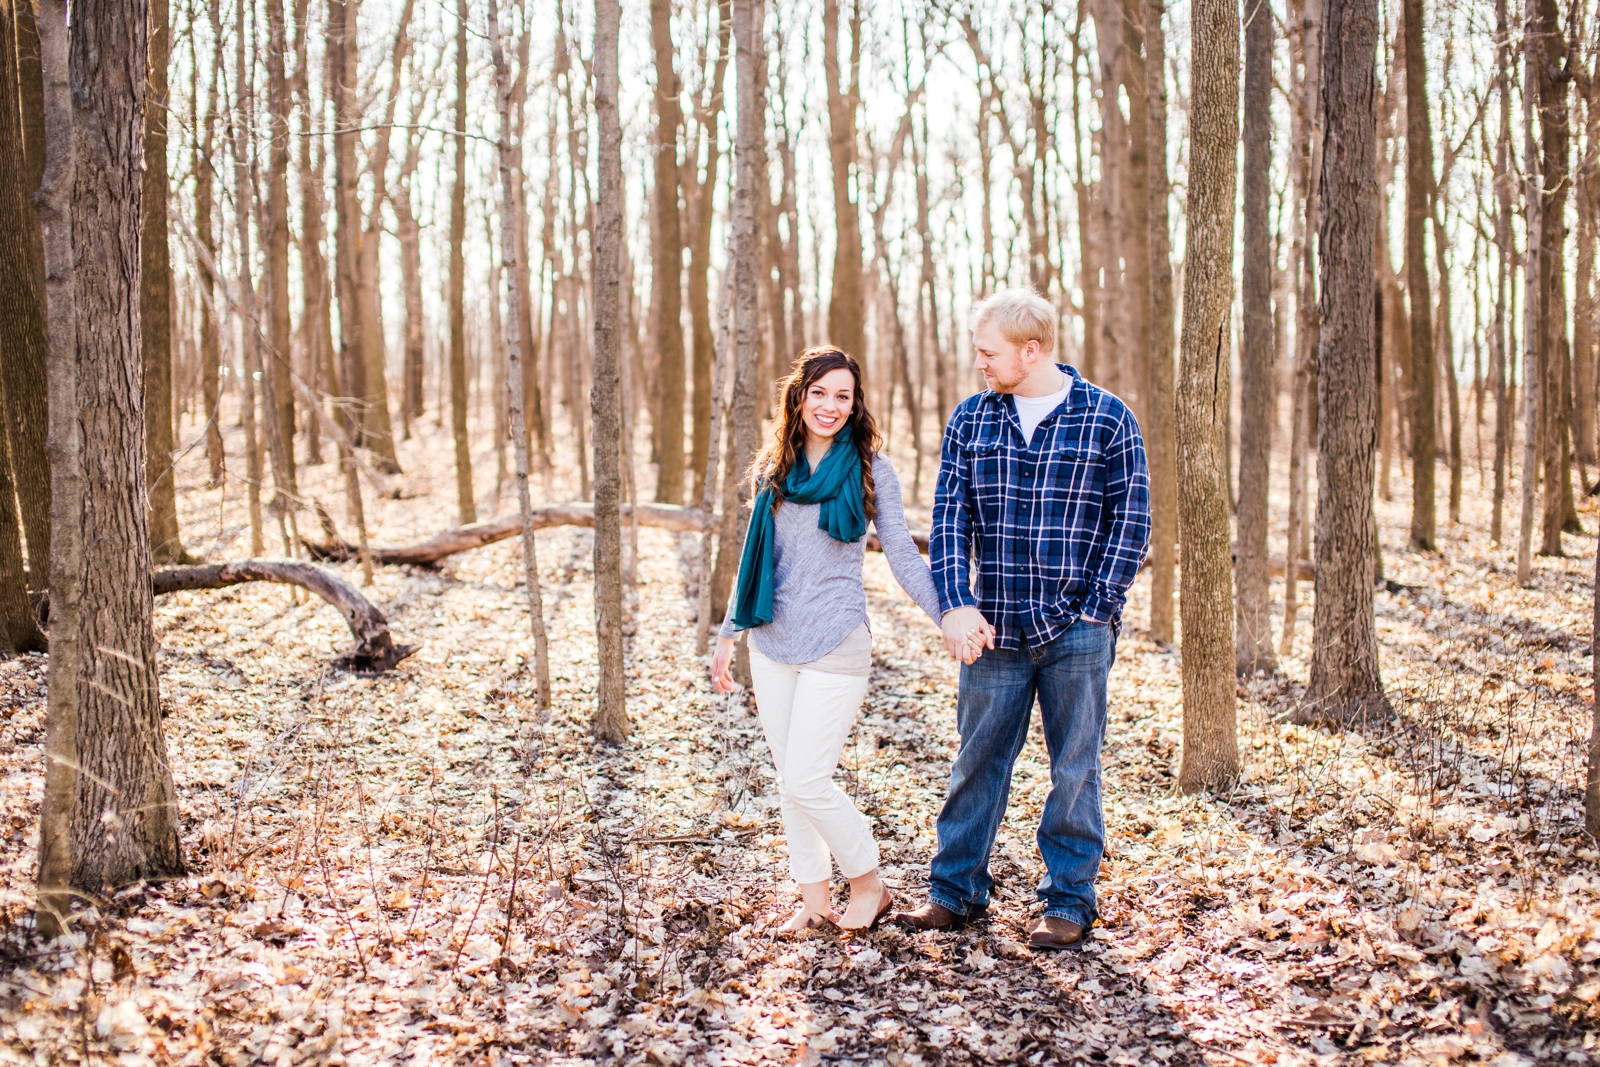 high-cliff-state-park-engagement-session_1502